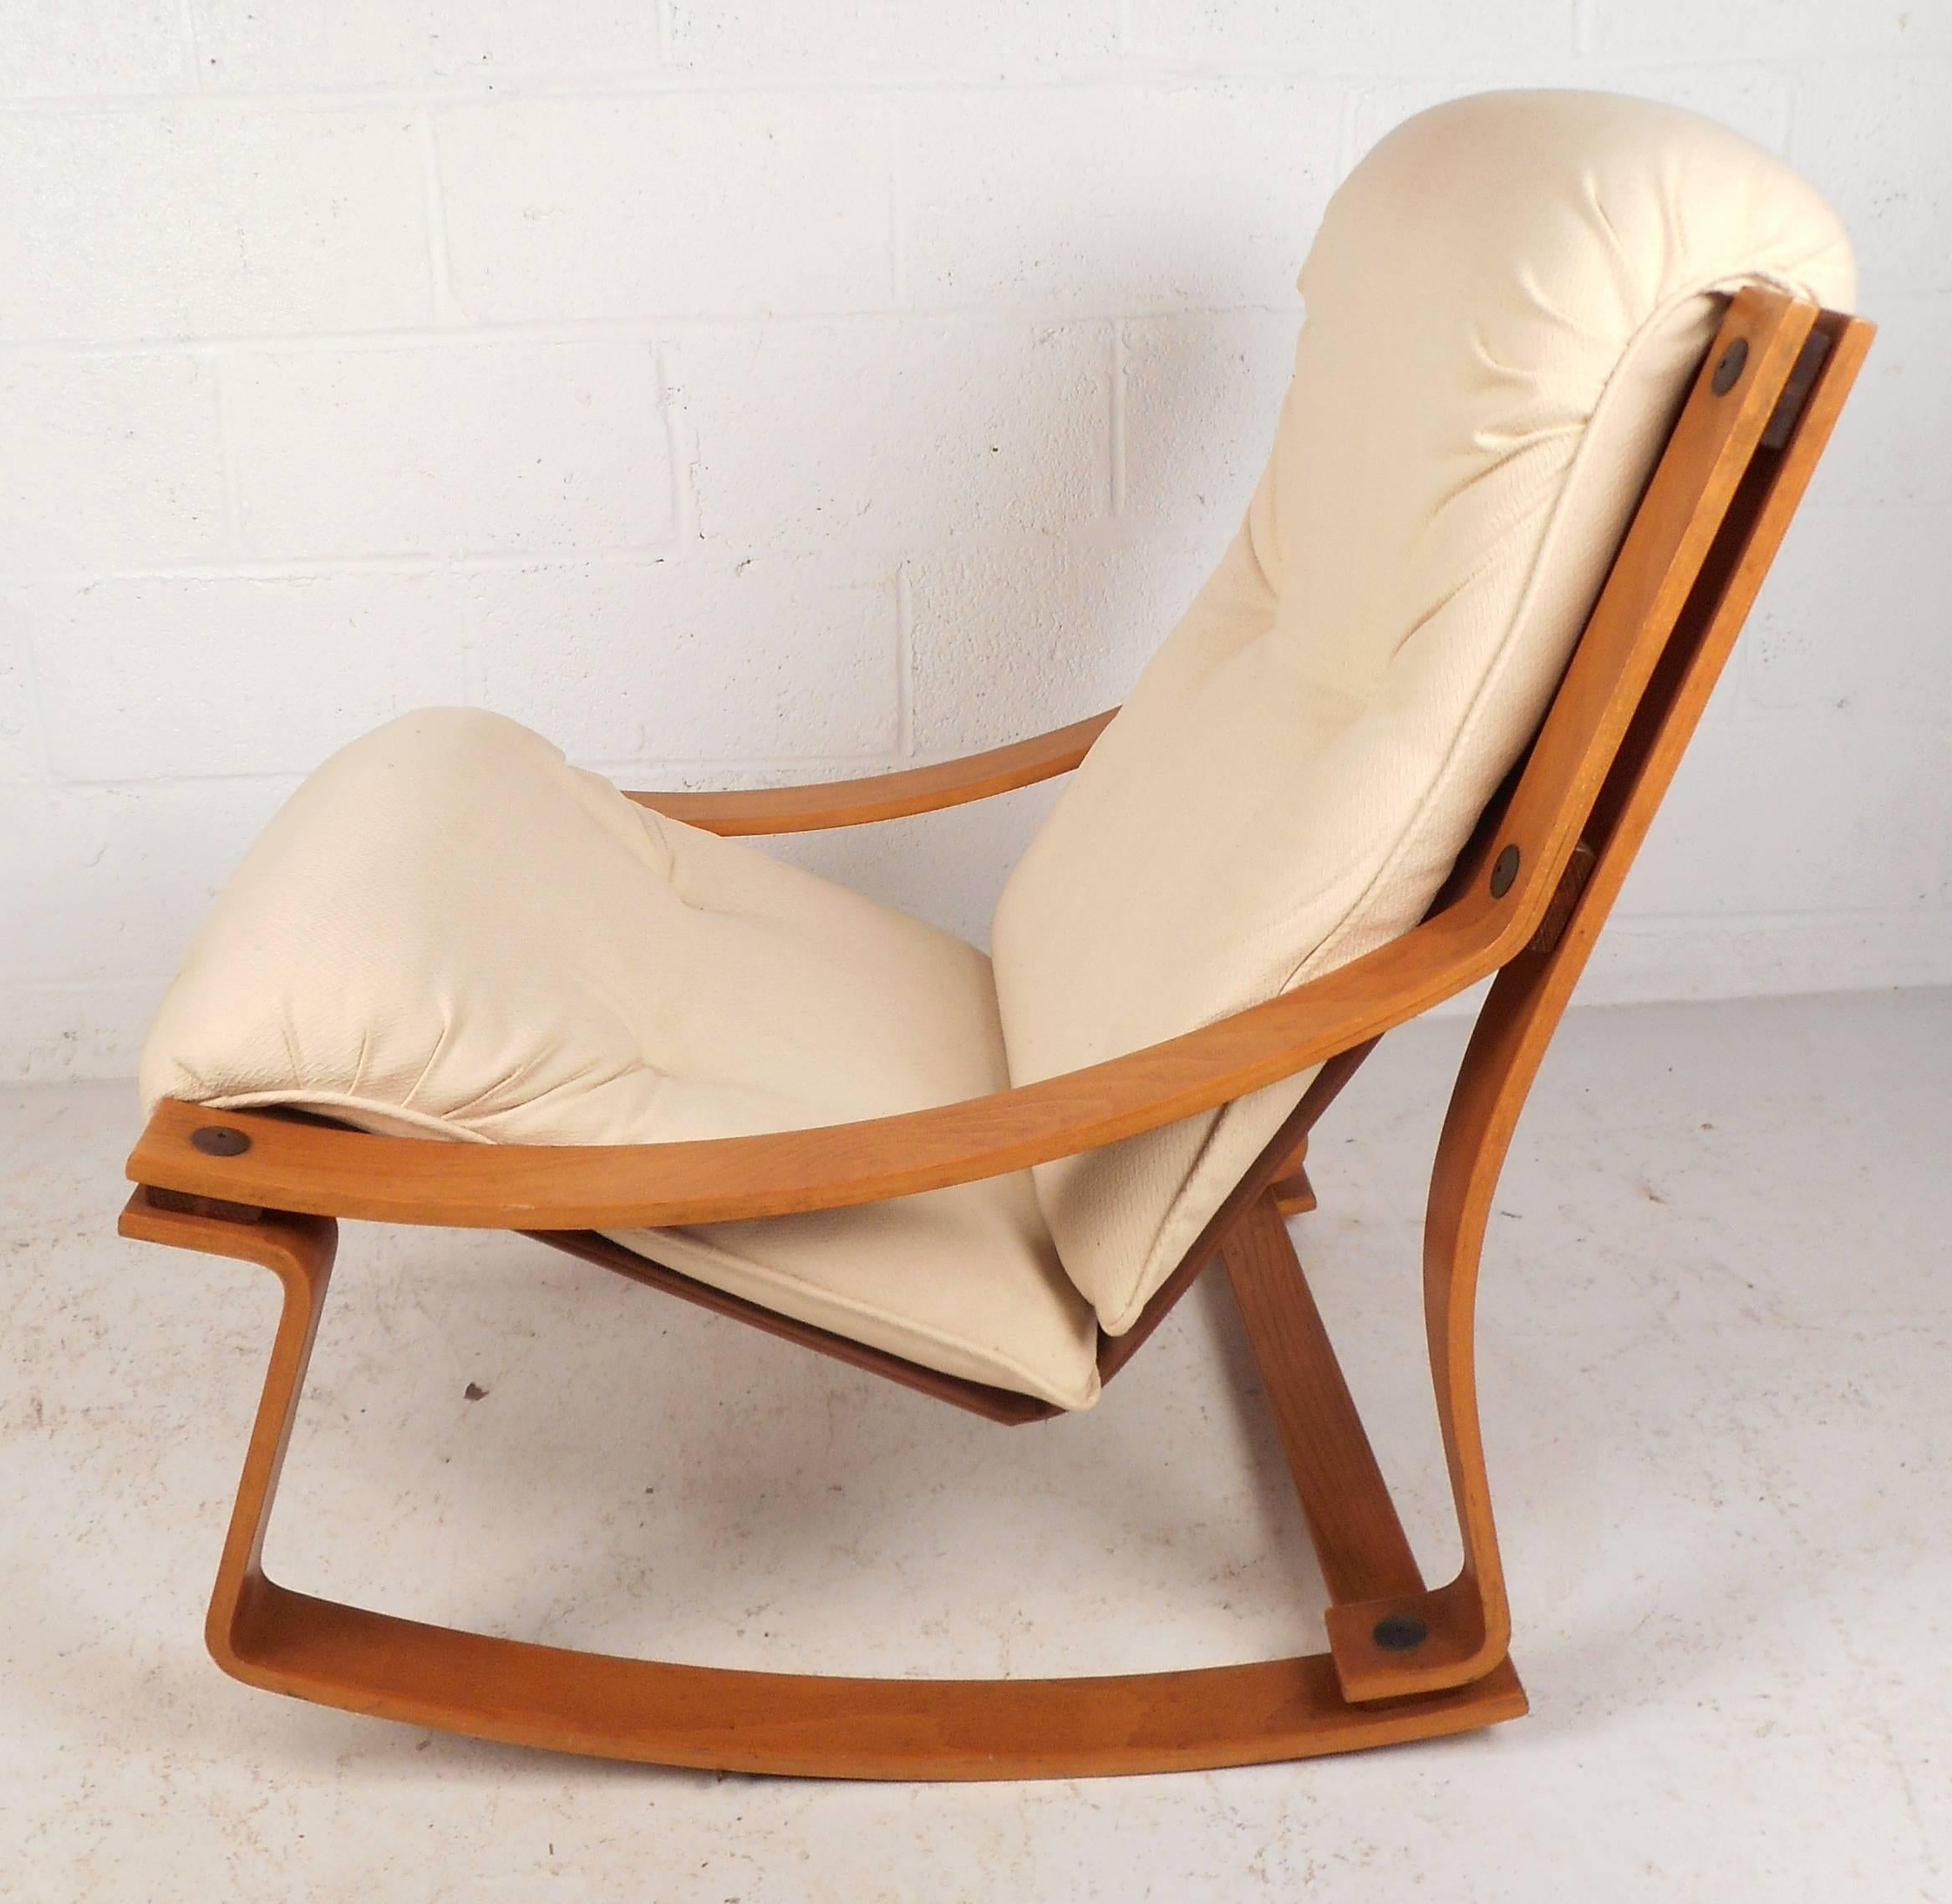 Beautiful vintage modern rocking chair features a bent plywood teak frame and plush white upholstery. Sleek design ensures comfort without sacrificing style in any modern interior. Please confirm item location (NY or NJ).